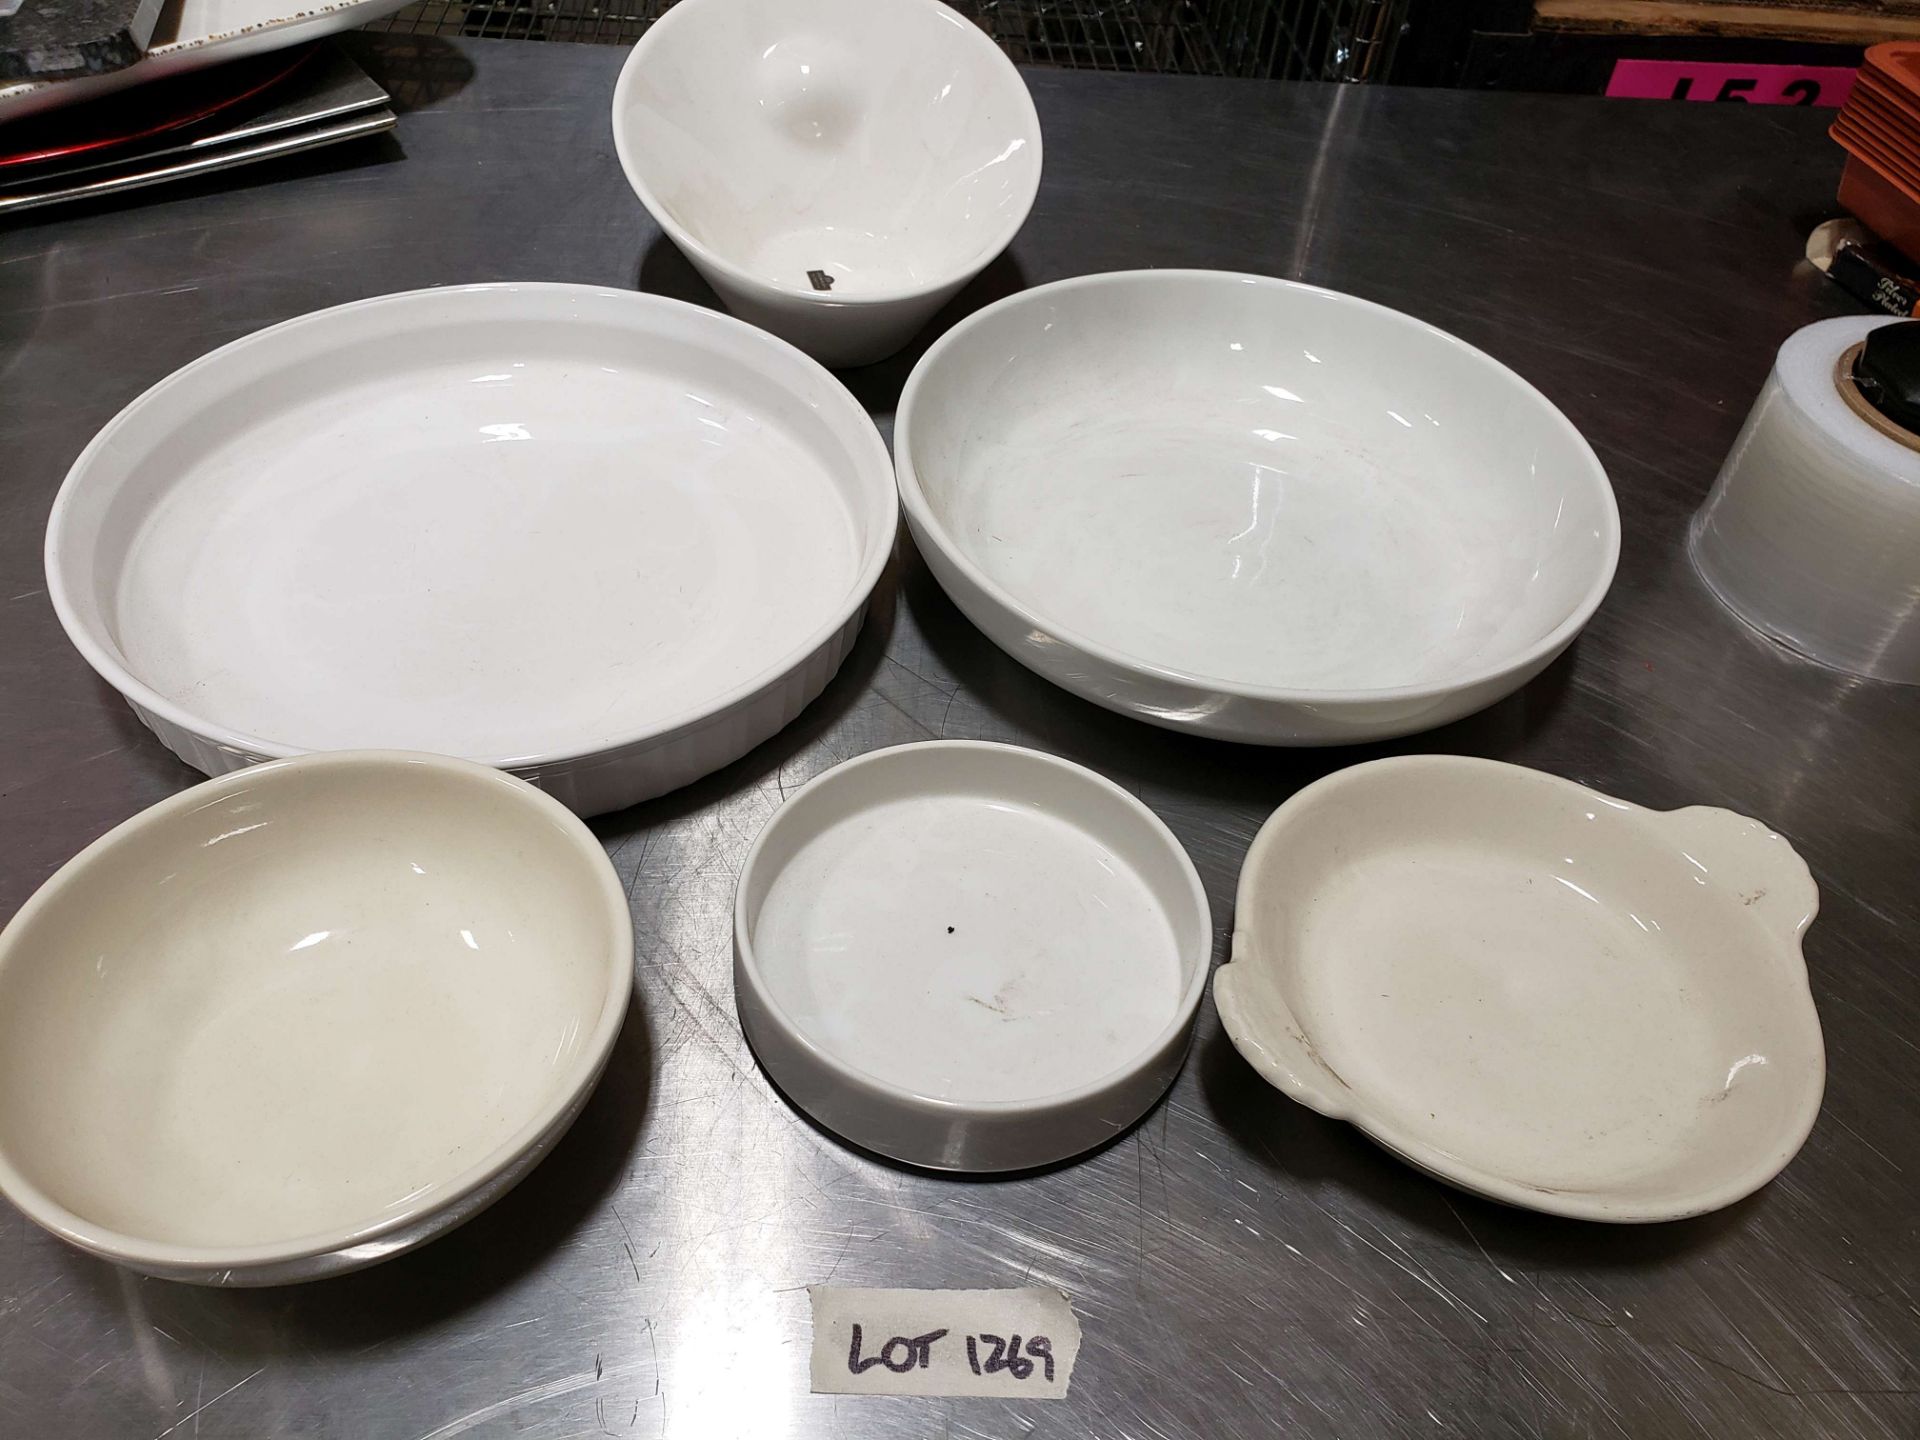 Assorted White Bowls & Dishes - 1 Lot